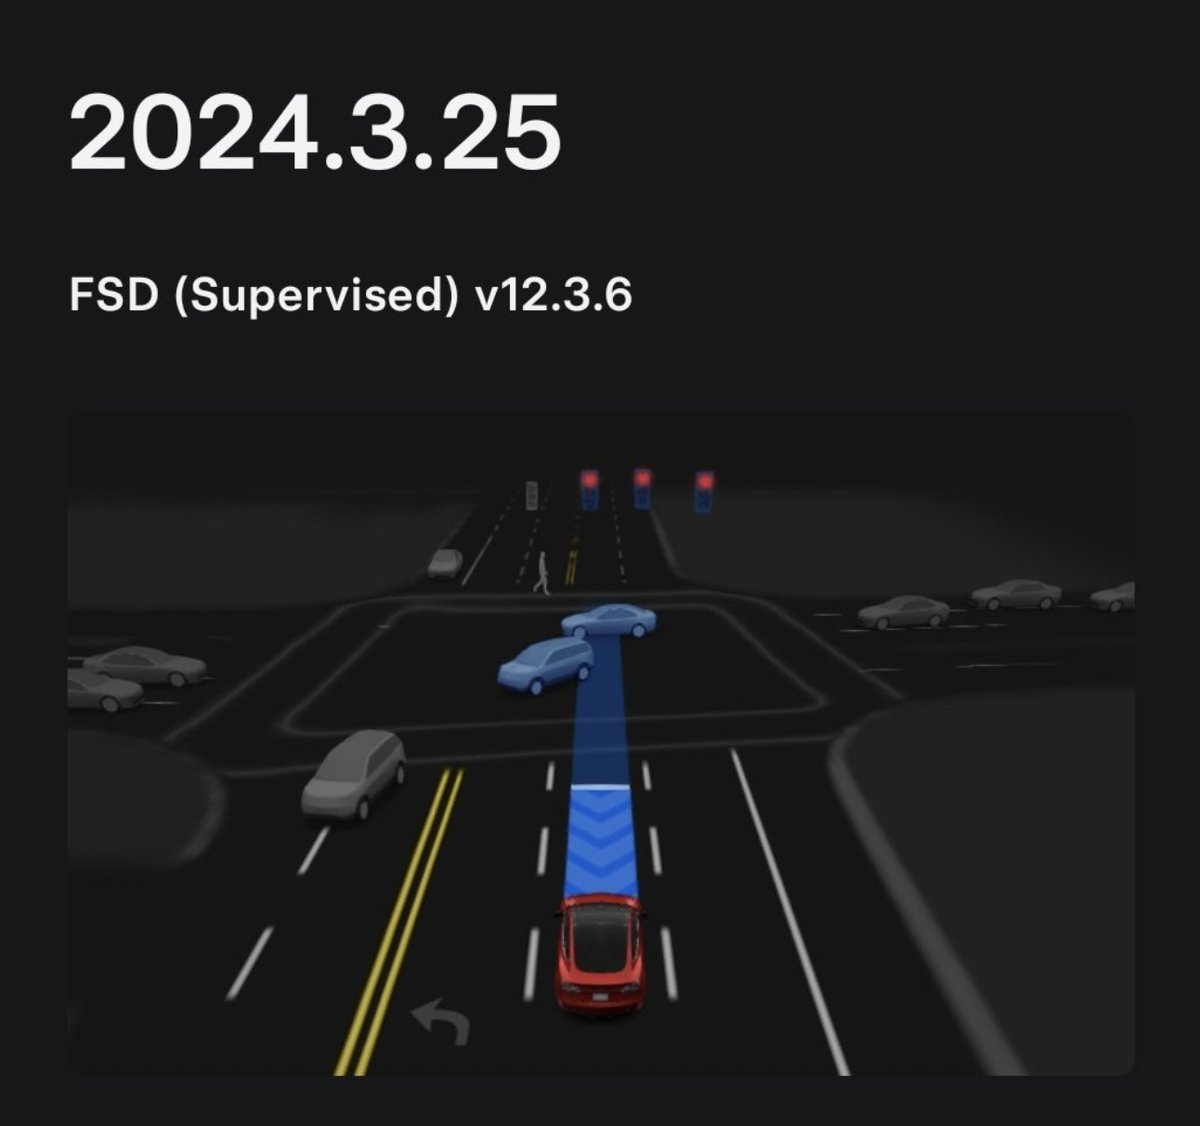 NEWS: Tesla's FSD (Supervised) v12.3.6 is now starting to roll out to normal Tesla owners in North America.